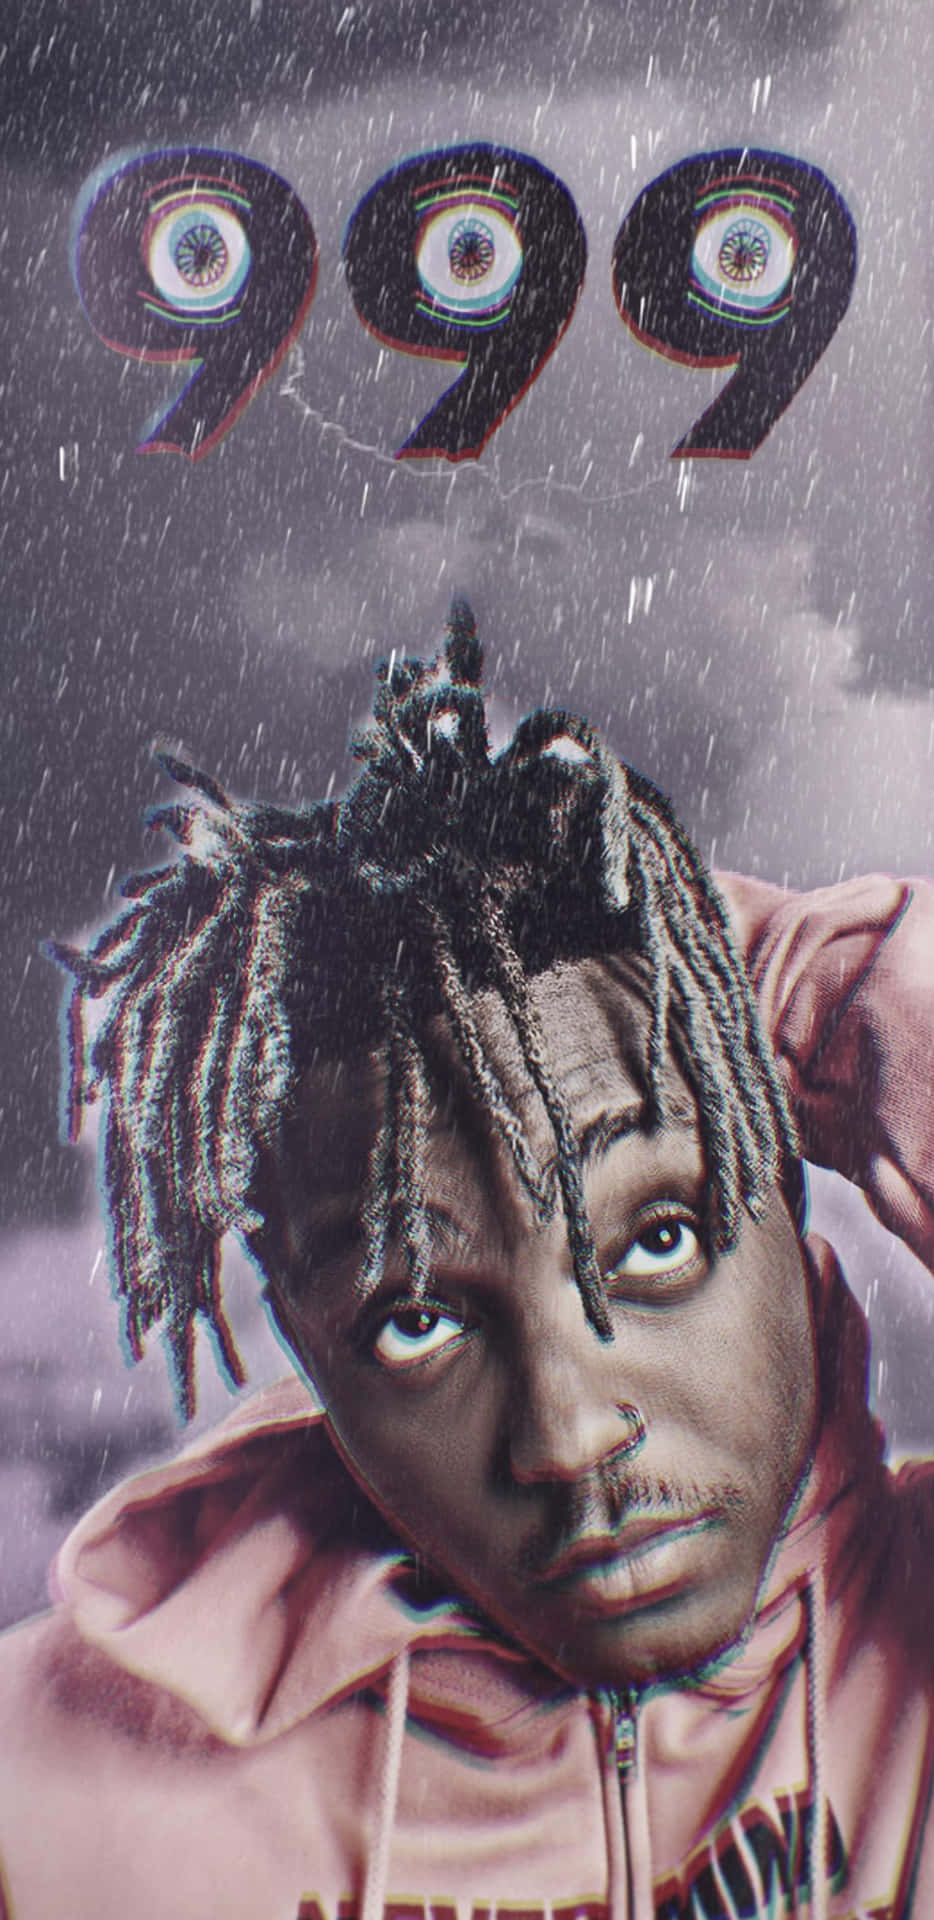 Juice Wrld's Thought-Provoking Art Wallpaper